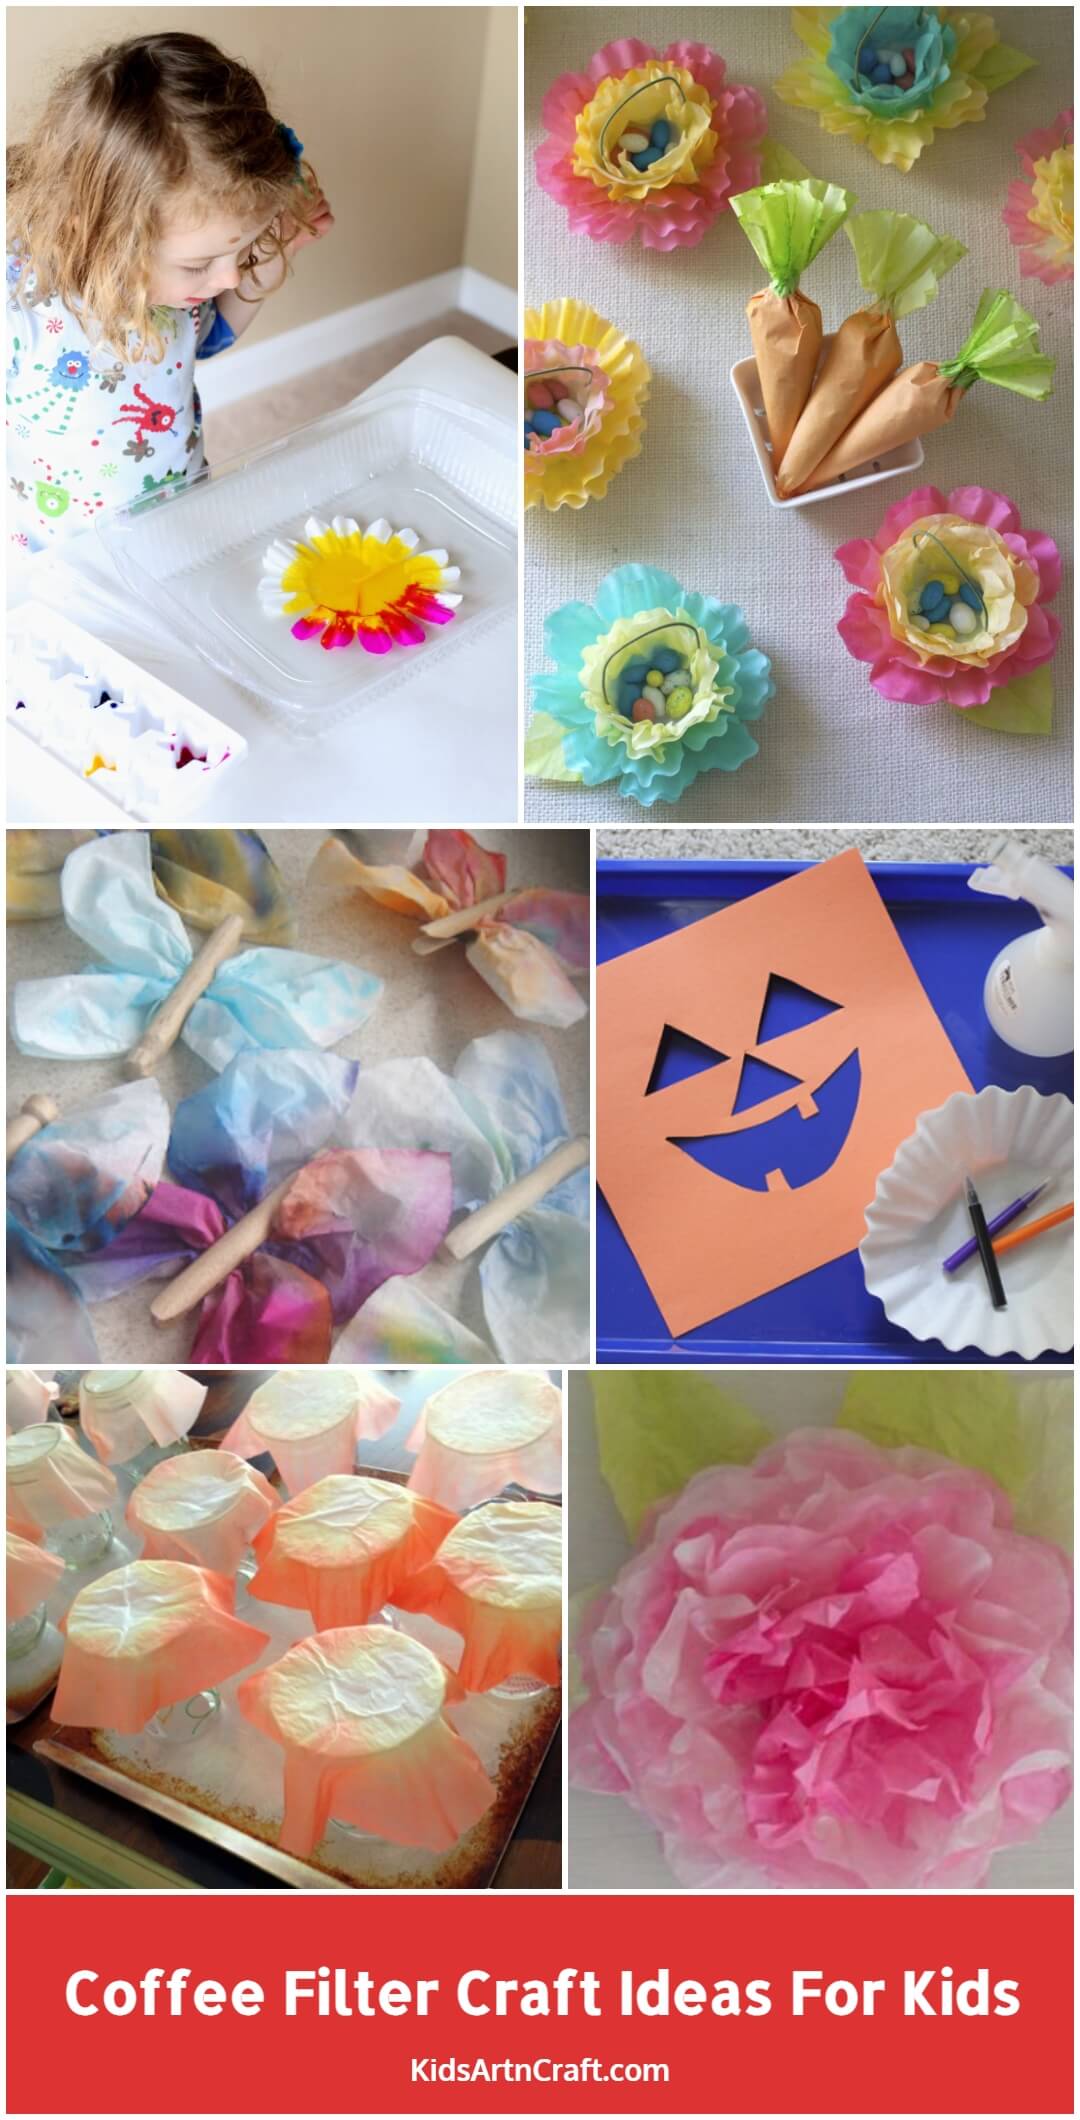 Coffee Filter Craft Ideas For Kids